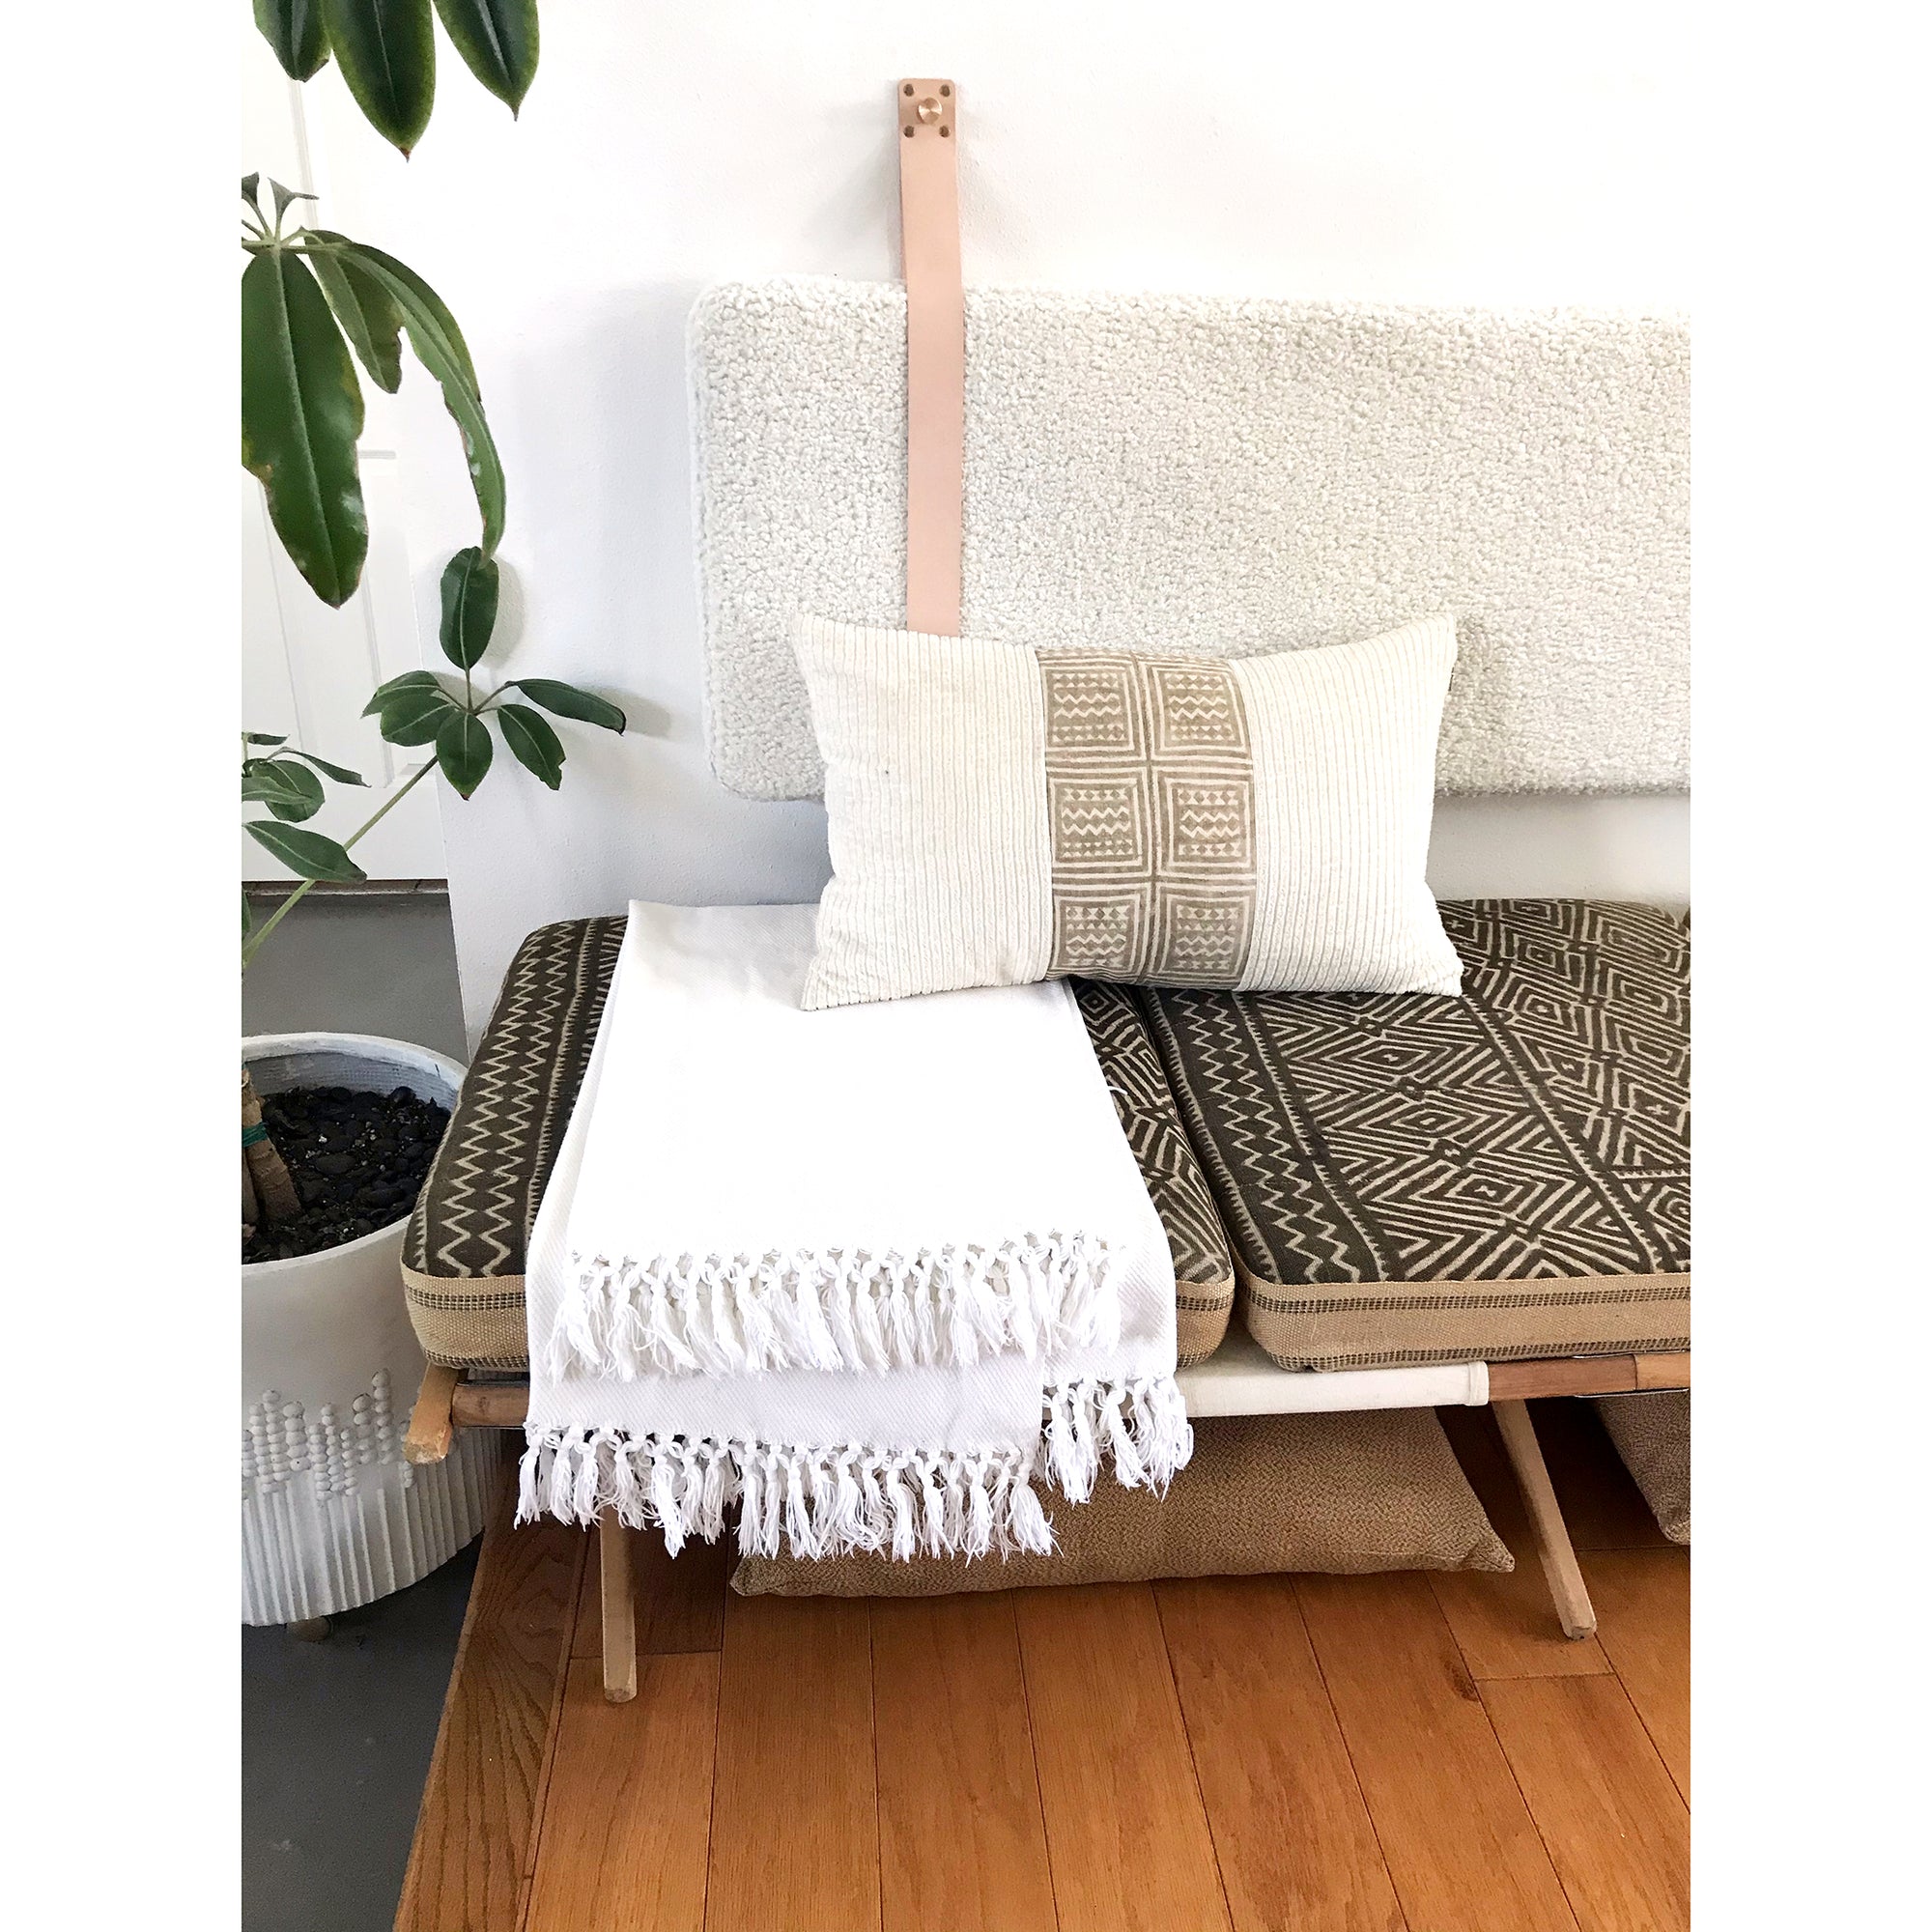 Off White Faux Shearling - Wall Mounted Headboard Backrest Cushion with Leather Straps - Multiple Sizes